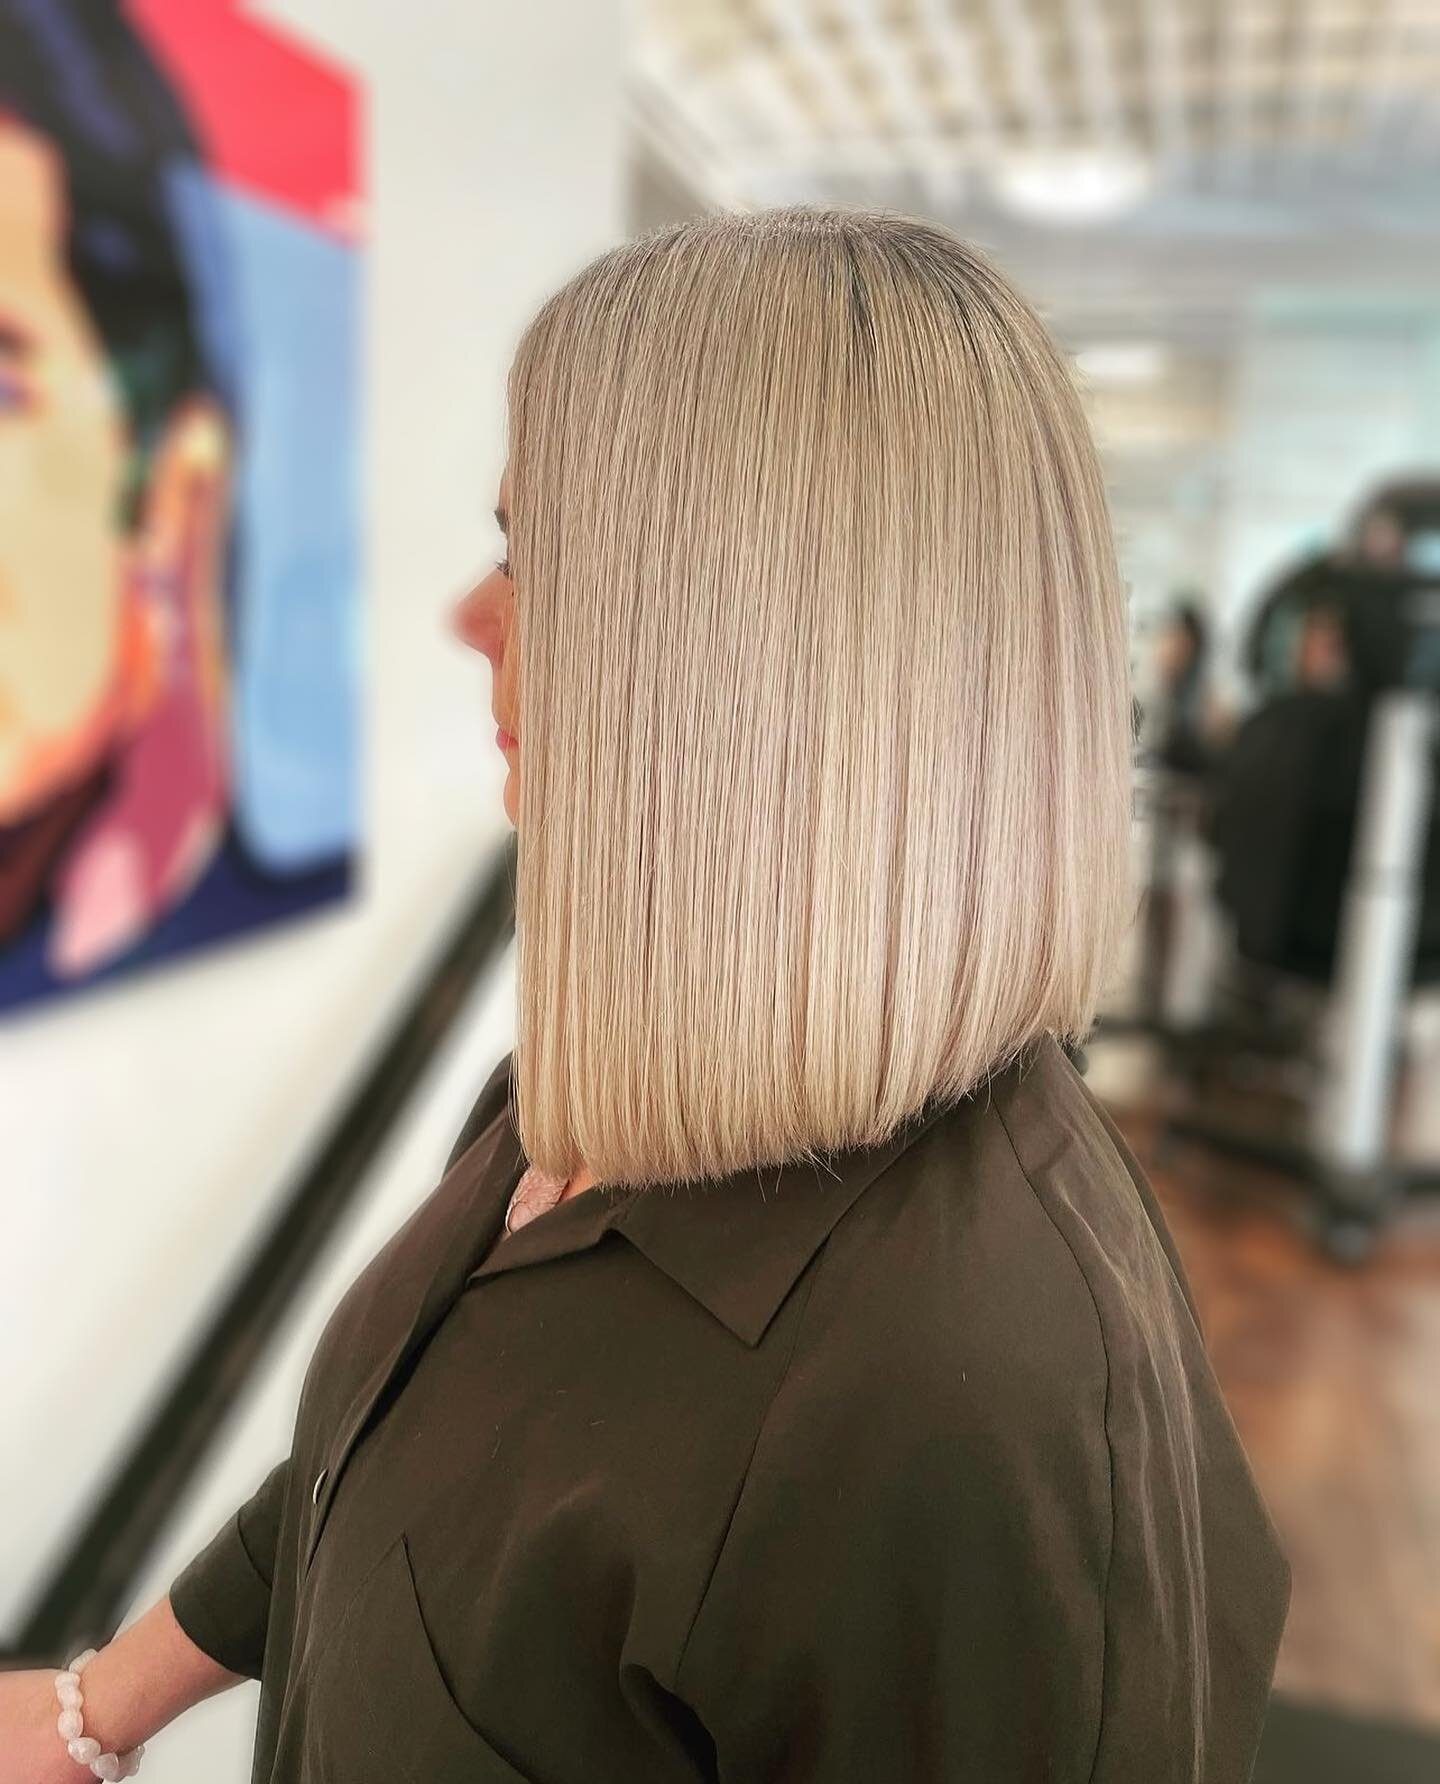 With the help of Milbon Lightener, Theresa was able to take her clients dark hair to the blonde of her dreams. Cut and color @theresaleon09 #seattlecolorist #seattlehairdresser #bleachandtone #blondebob #blondeambition #bob #lob #antoniosalon #seattl